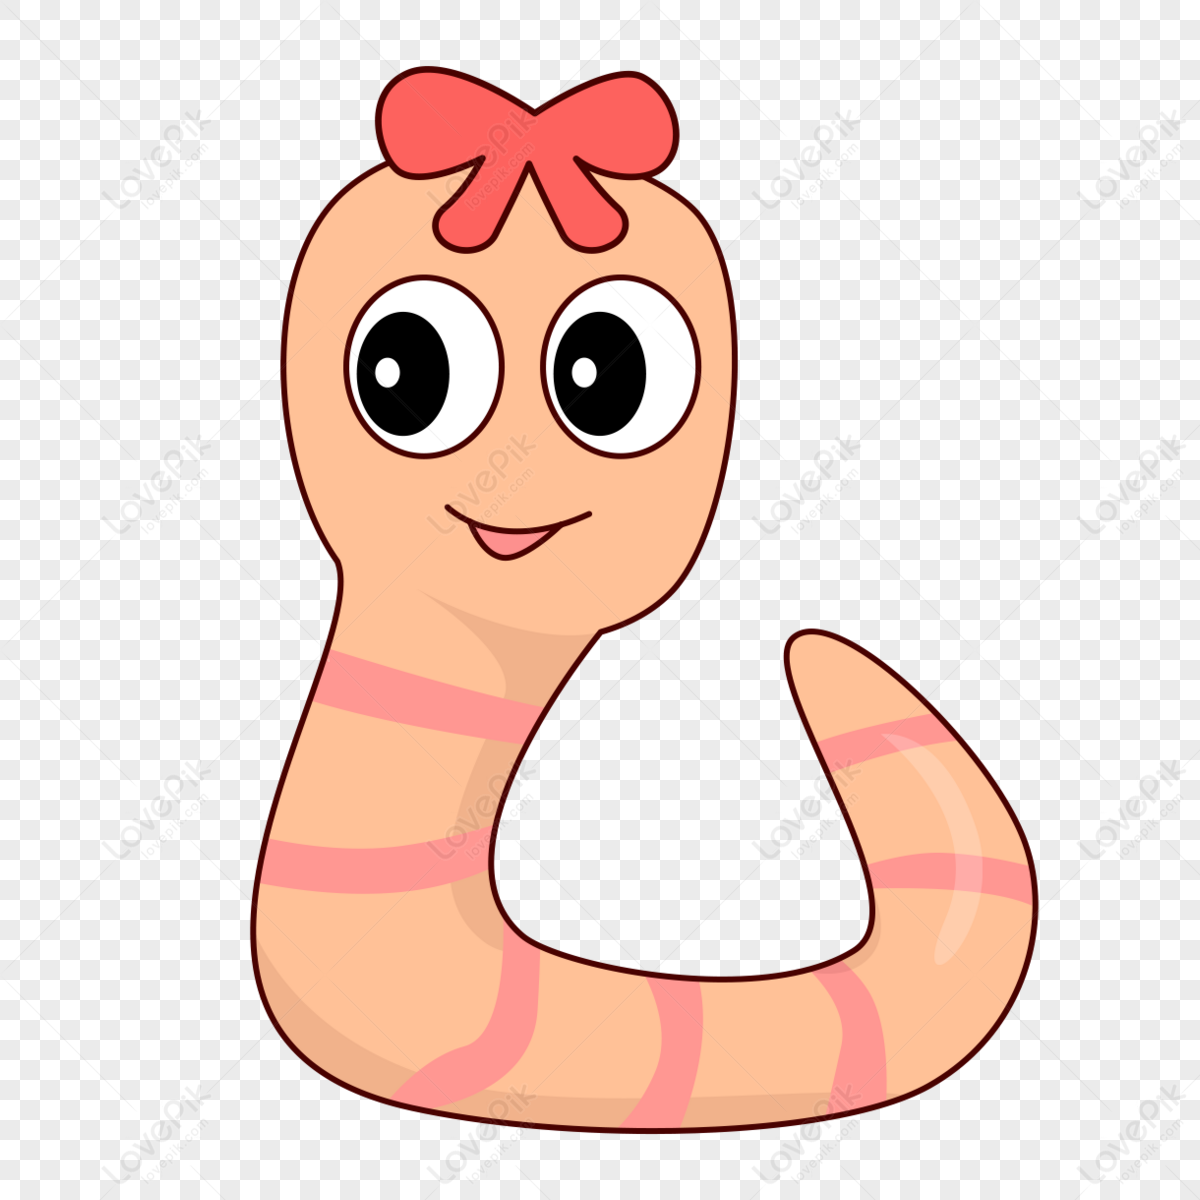 Cute Worm PNG Images With Transparent Background